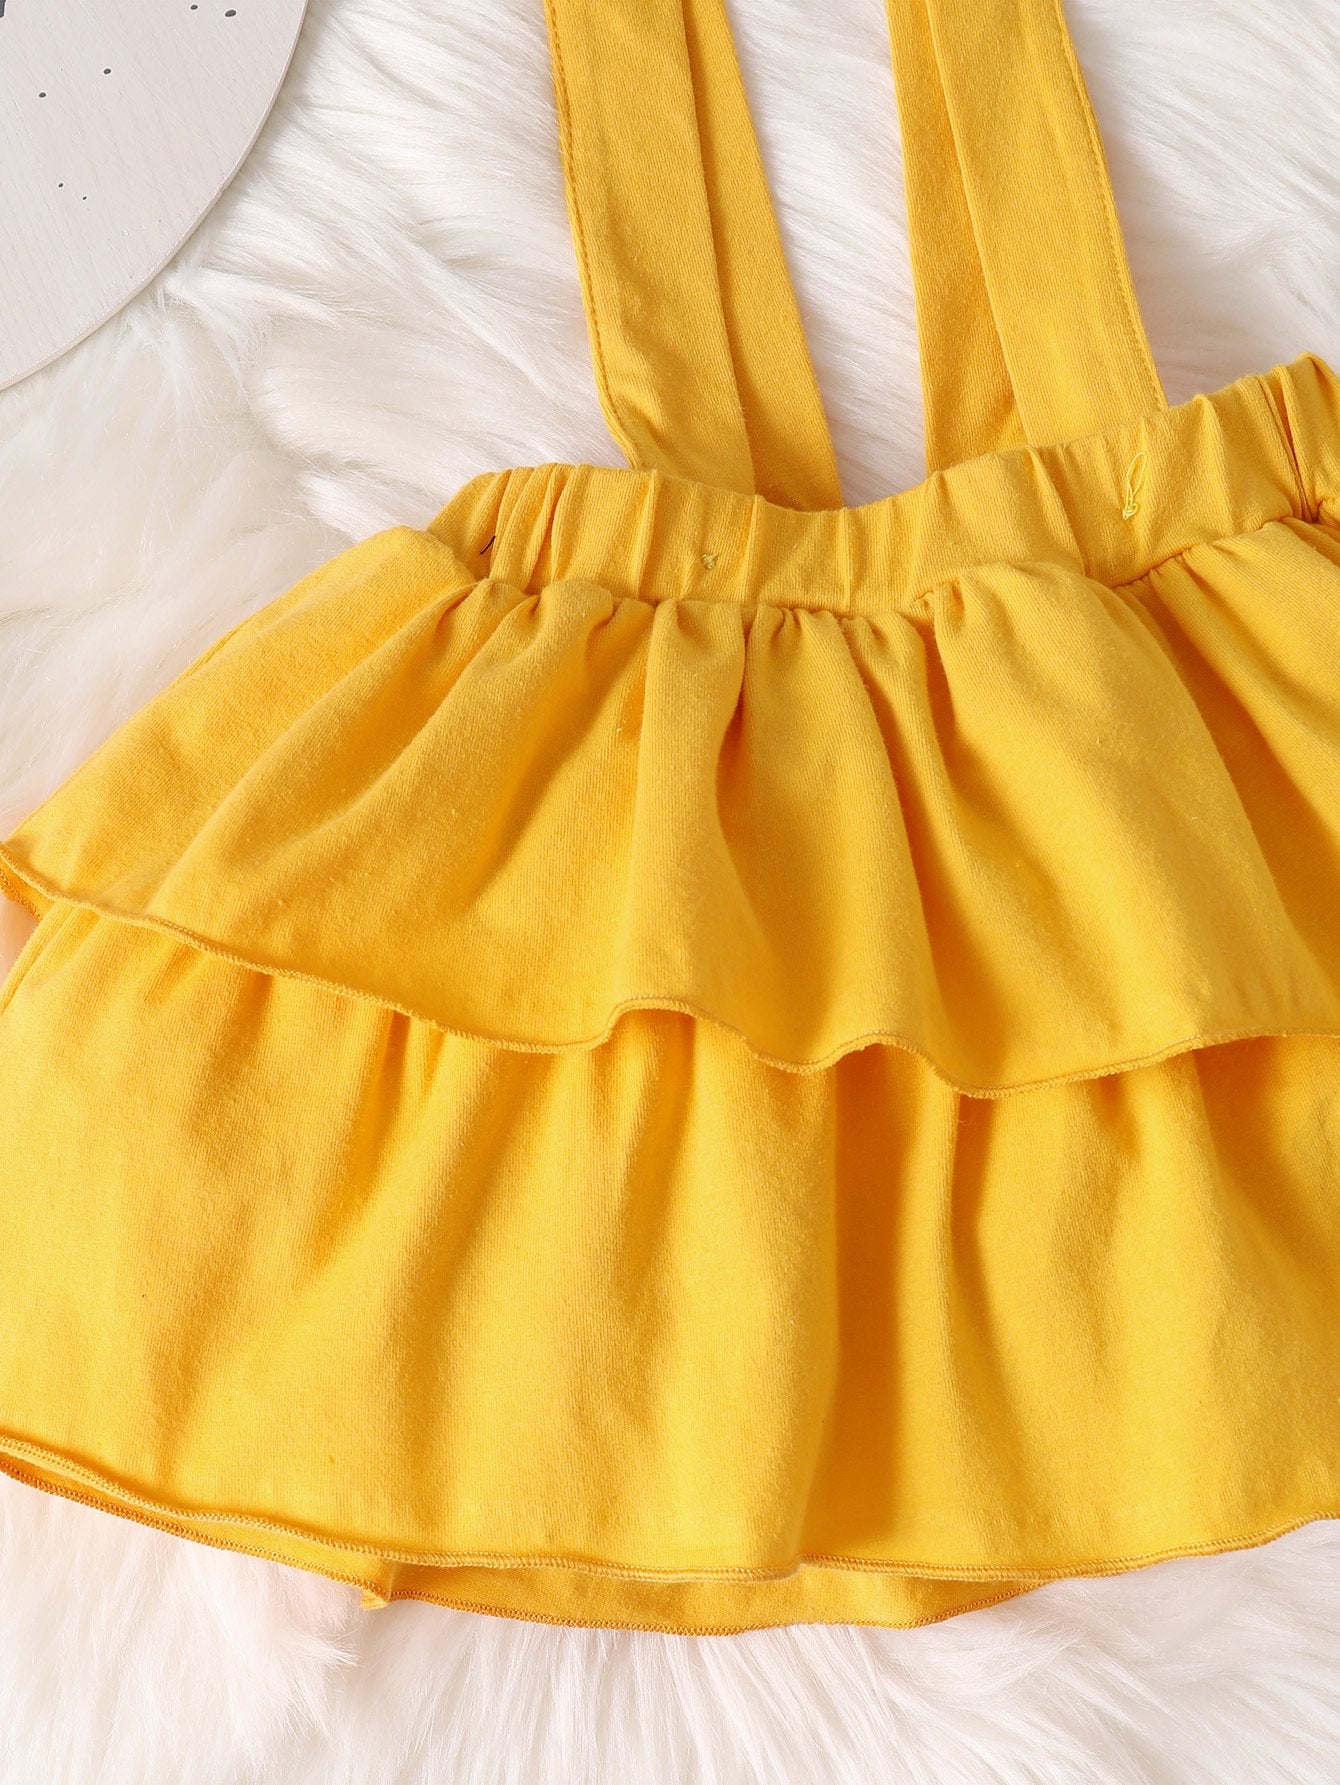 Baby Girls Solid Color Princess Skirt cheap baby clothes wholesale